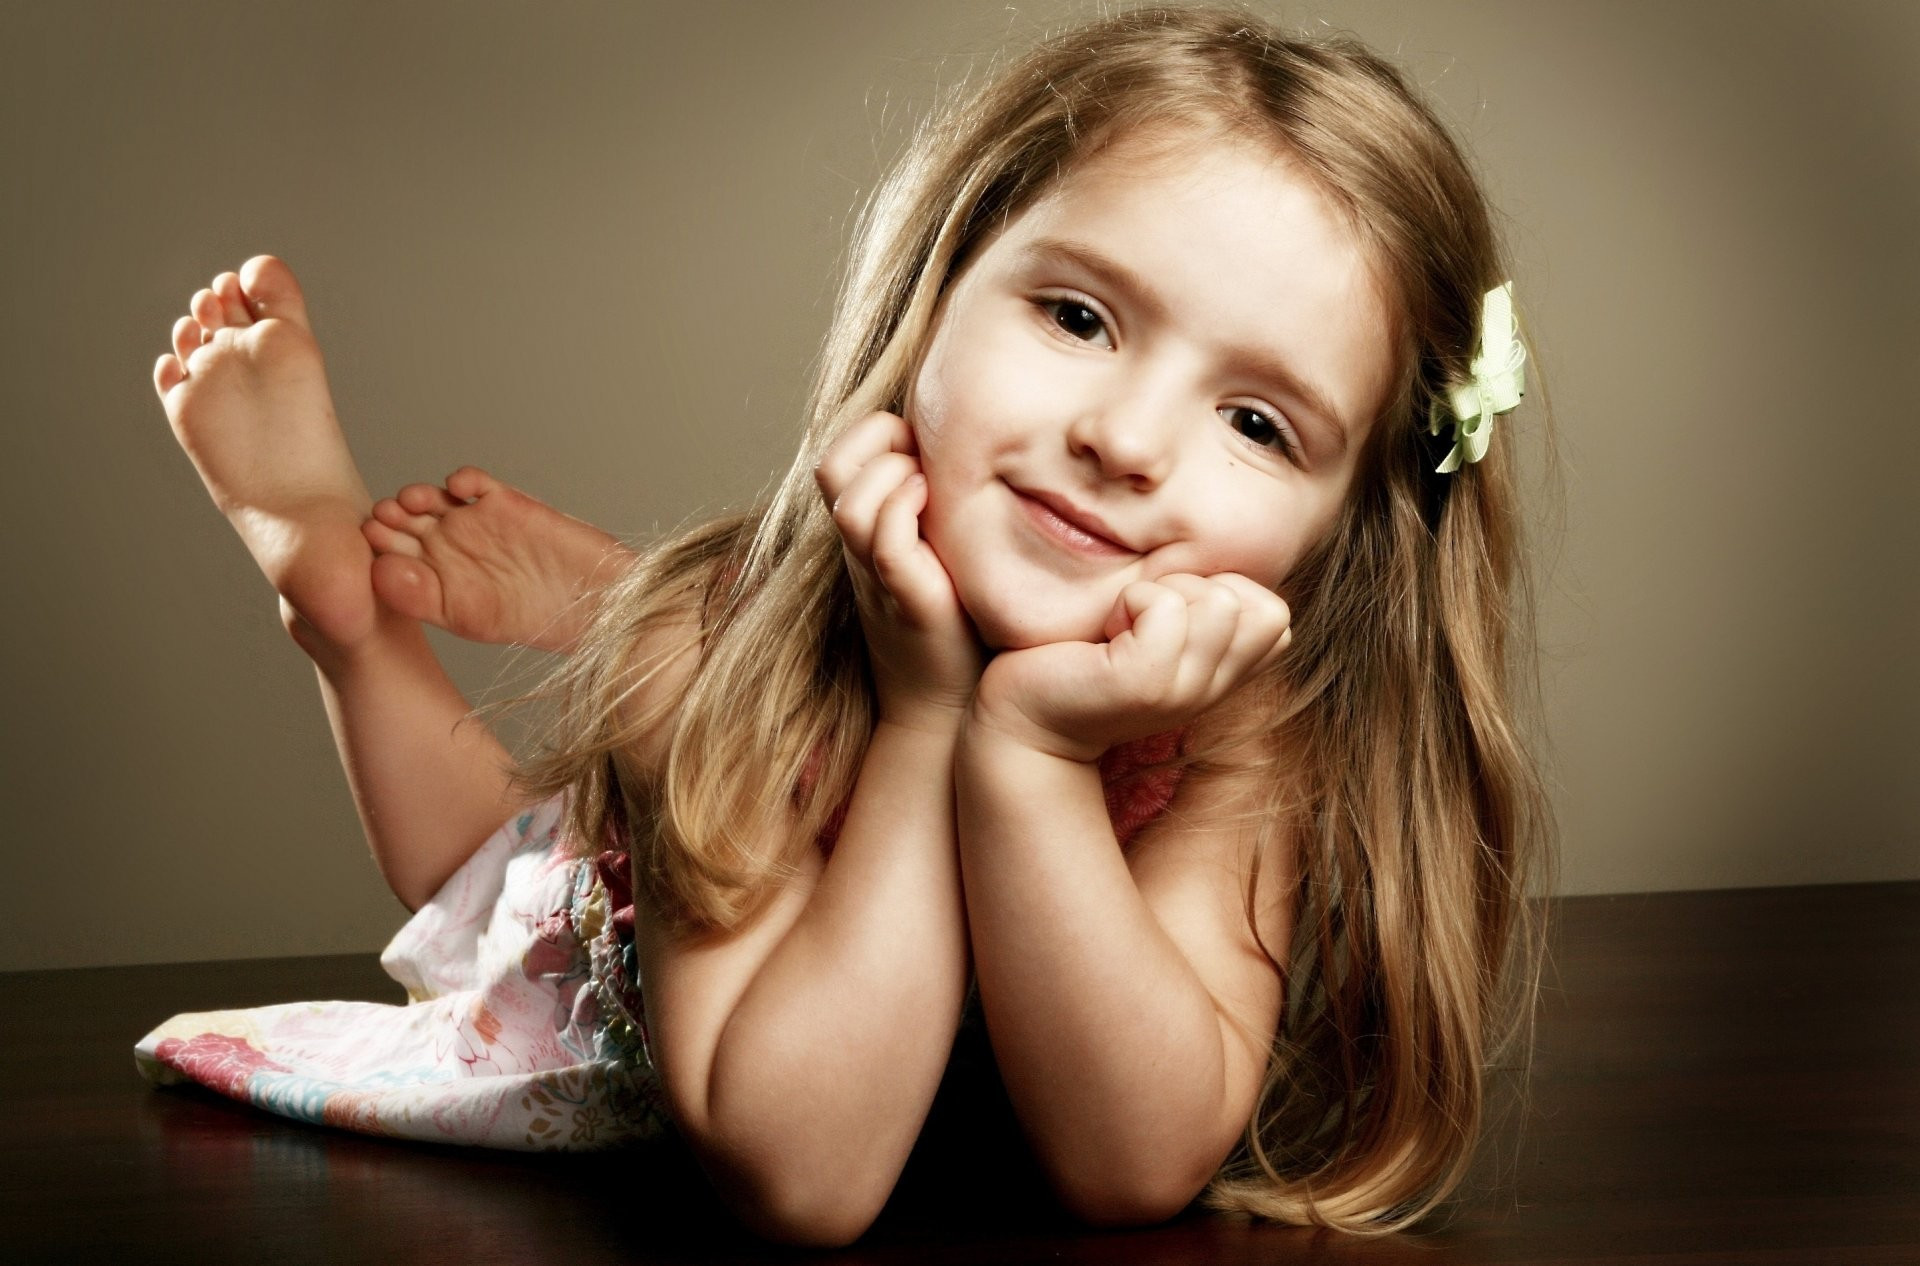 A little girl lying on her stomach and looking at the camera